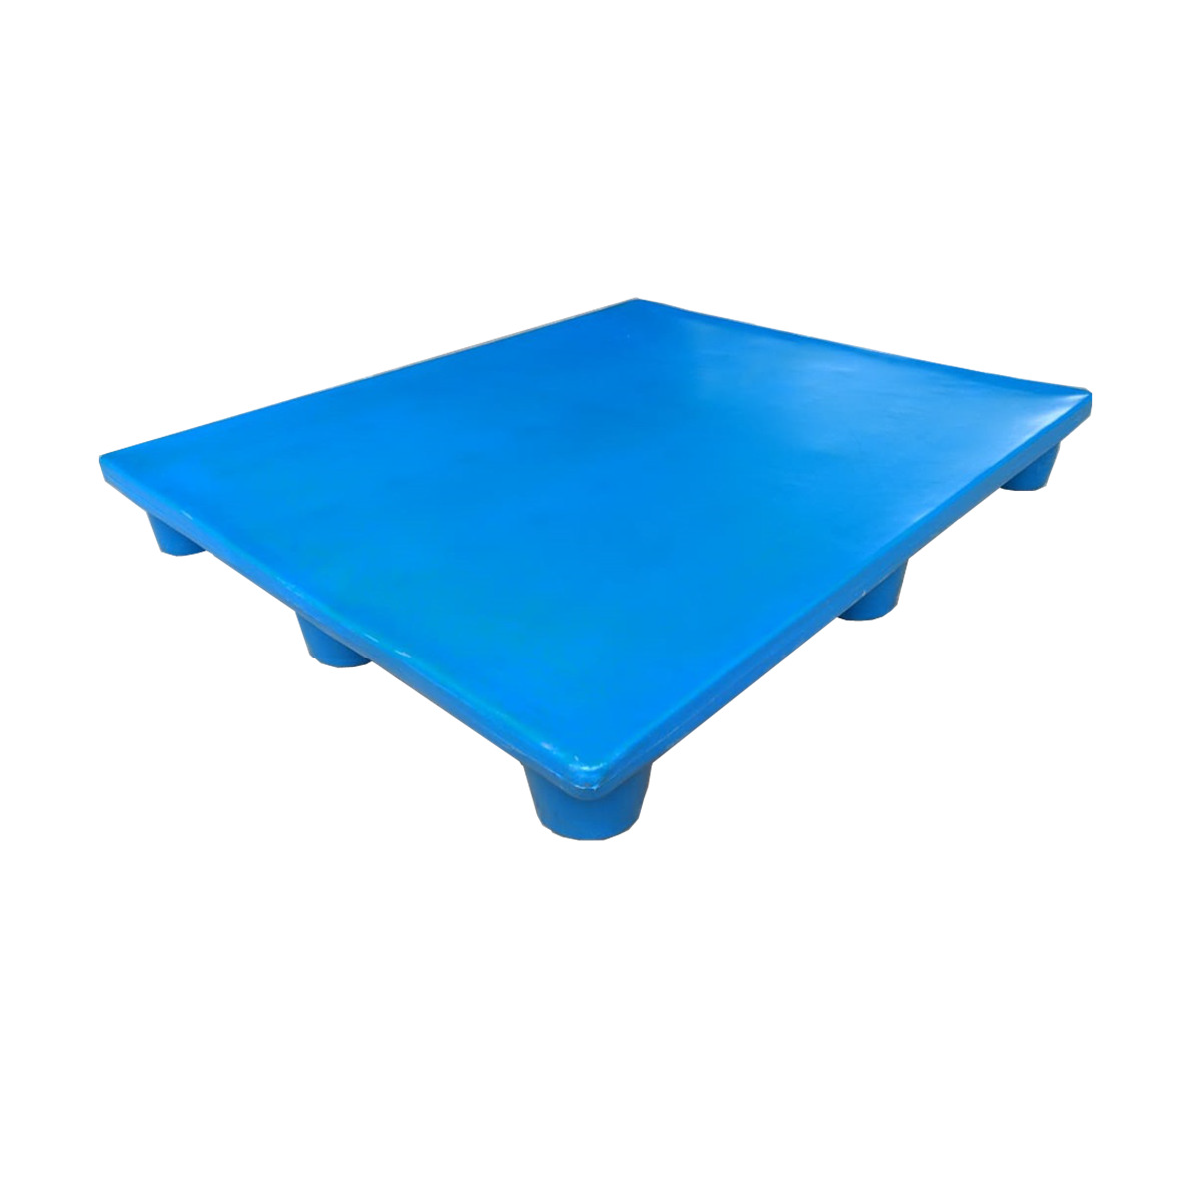 Swift TechnoPlast Roto Moulded Eco Plastic Pallet 4 Way Non-Reversible Steel Reinforced Plain Top 1200 x 1000 x 160mm (Pack of 5)